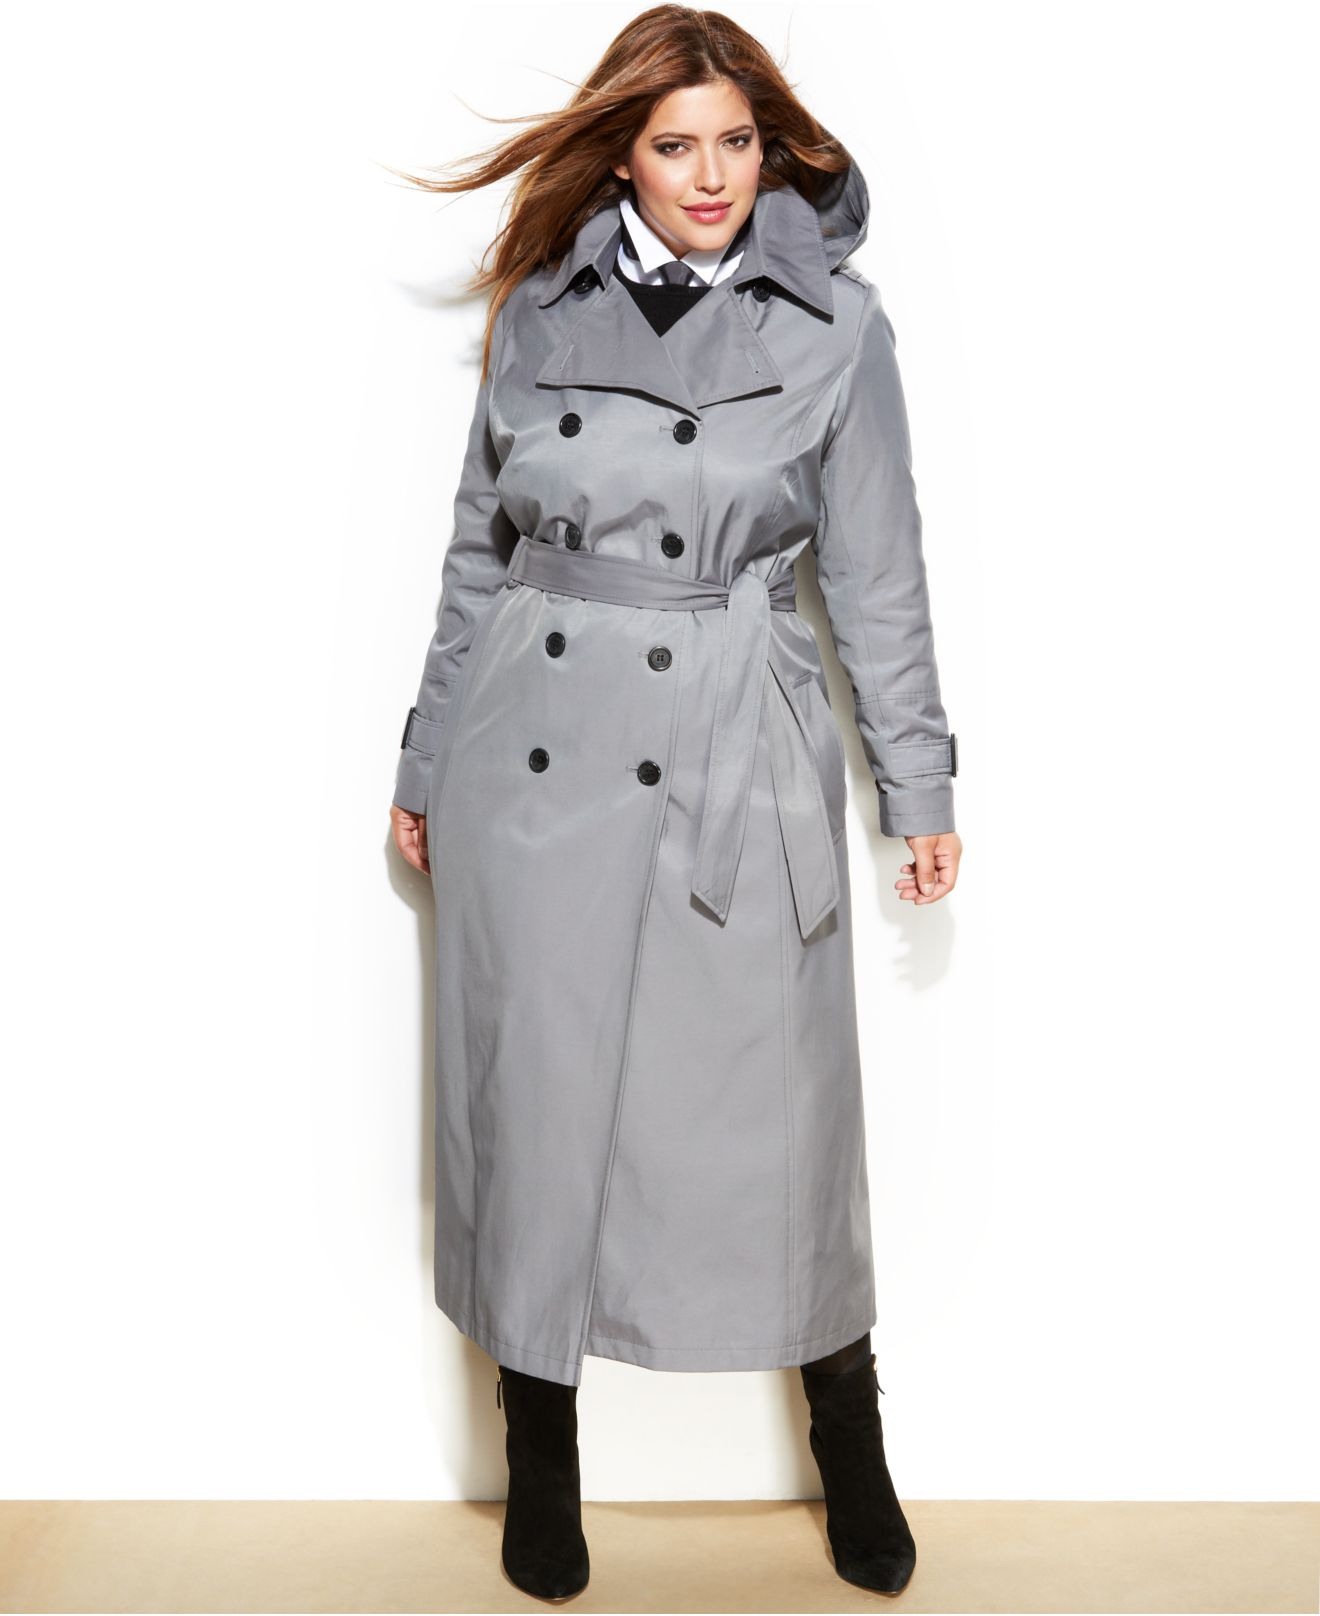 Lyst - Dkny Plus Size Maxi Trench Coat in Gray